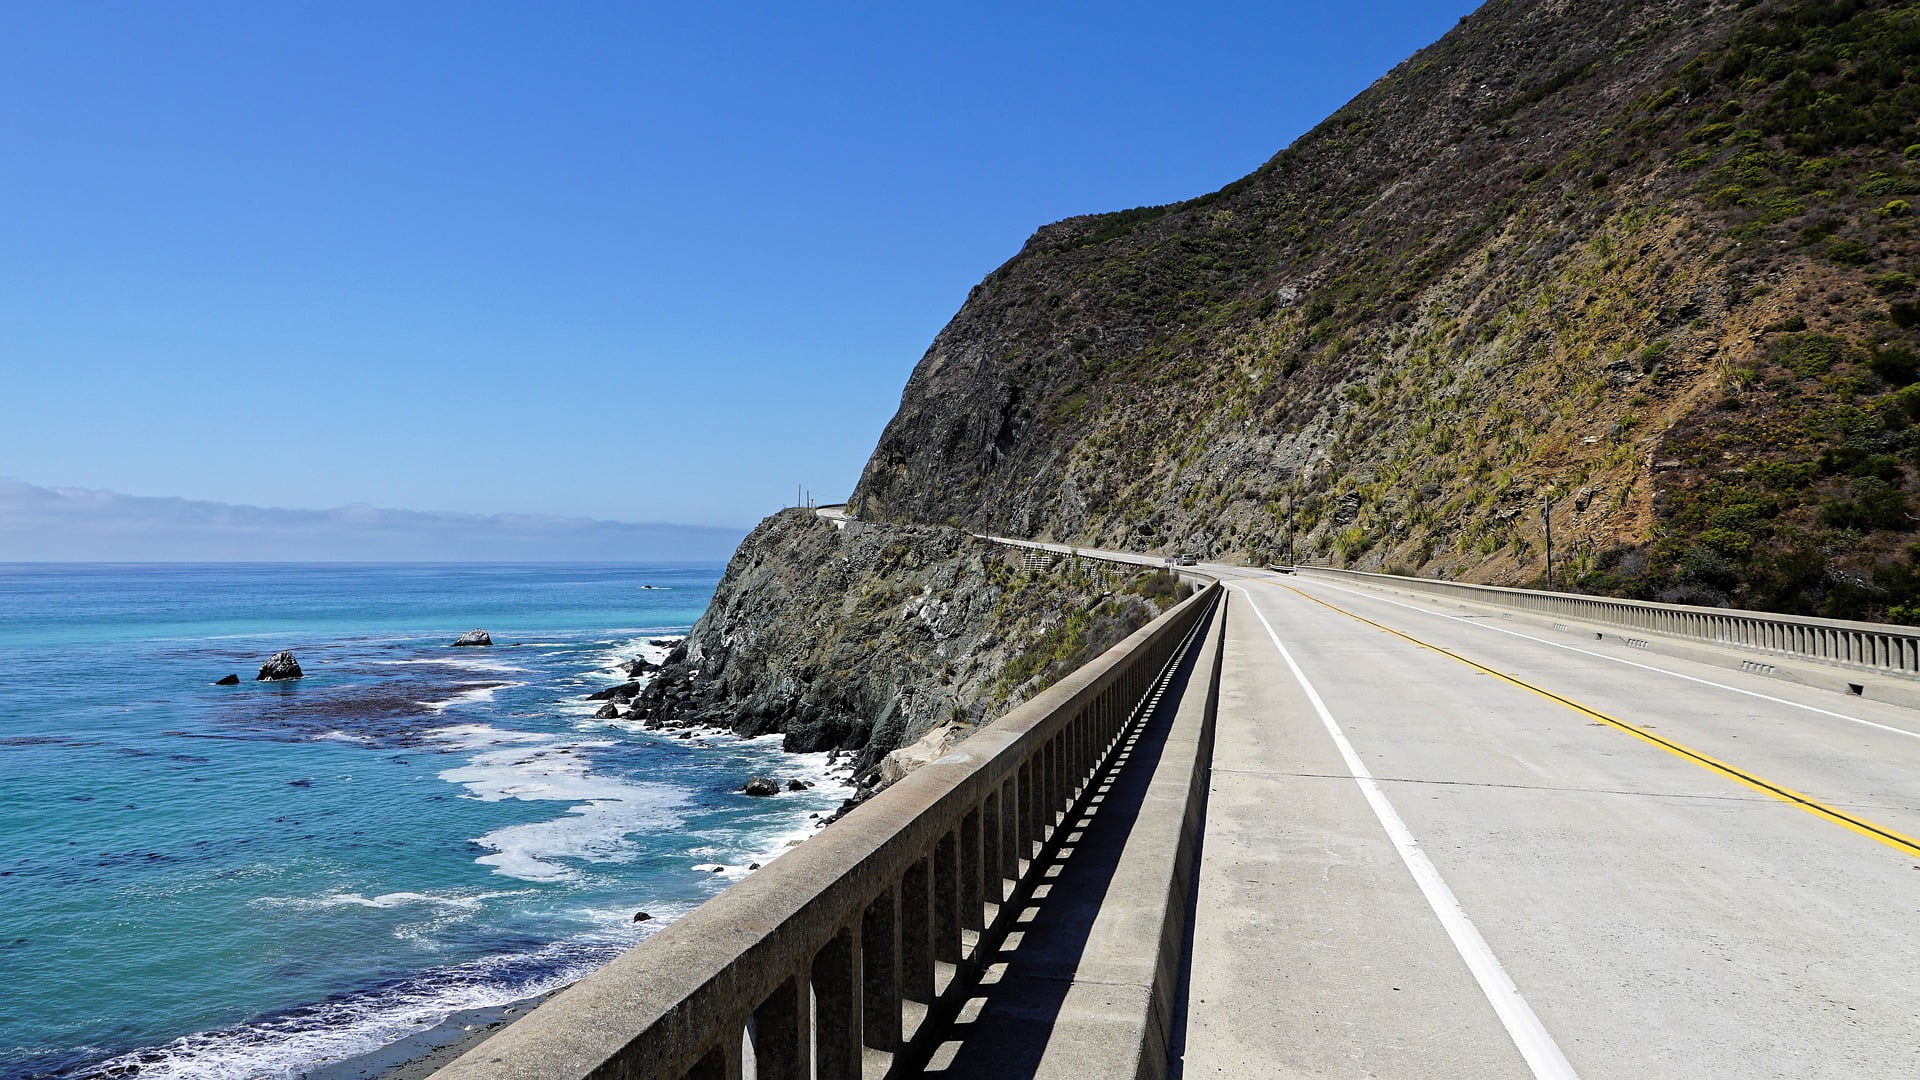 What Is Big Sur Known For?